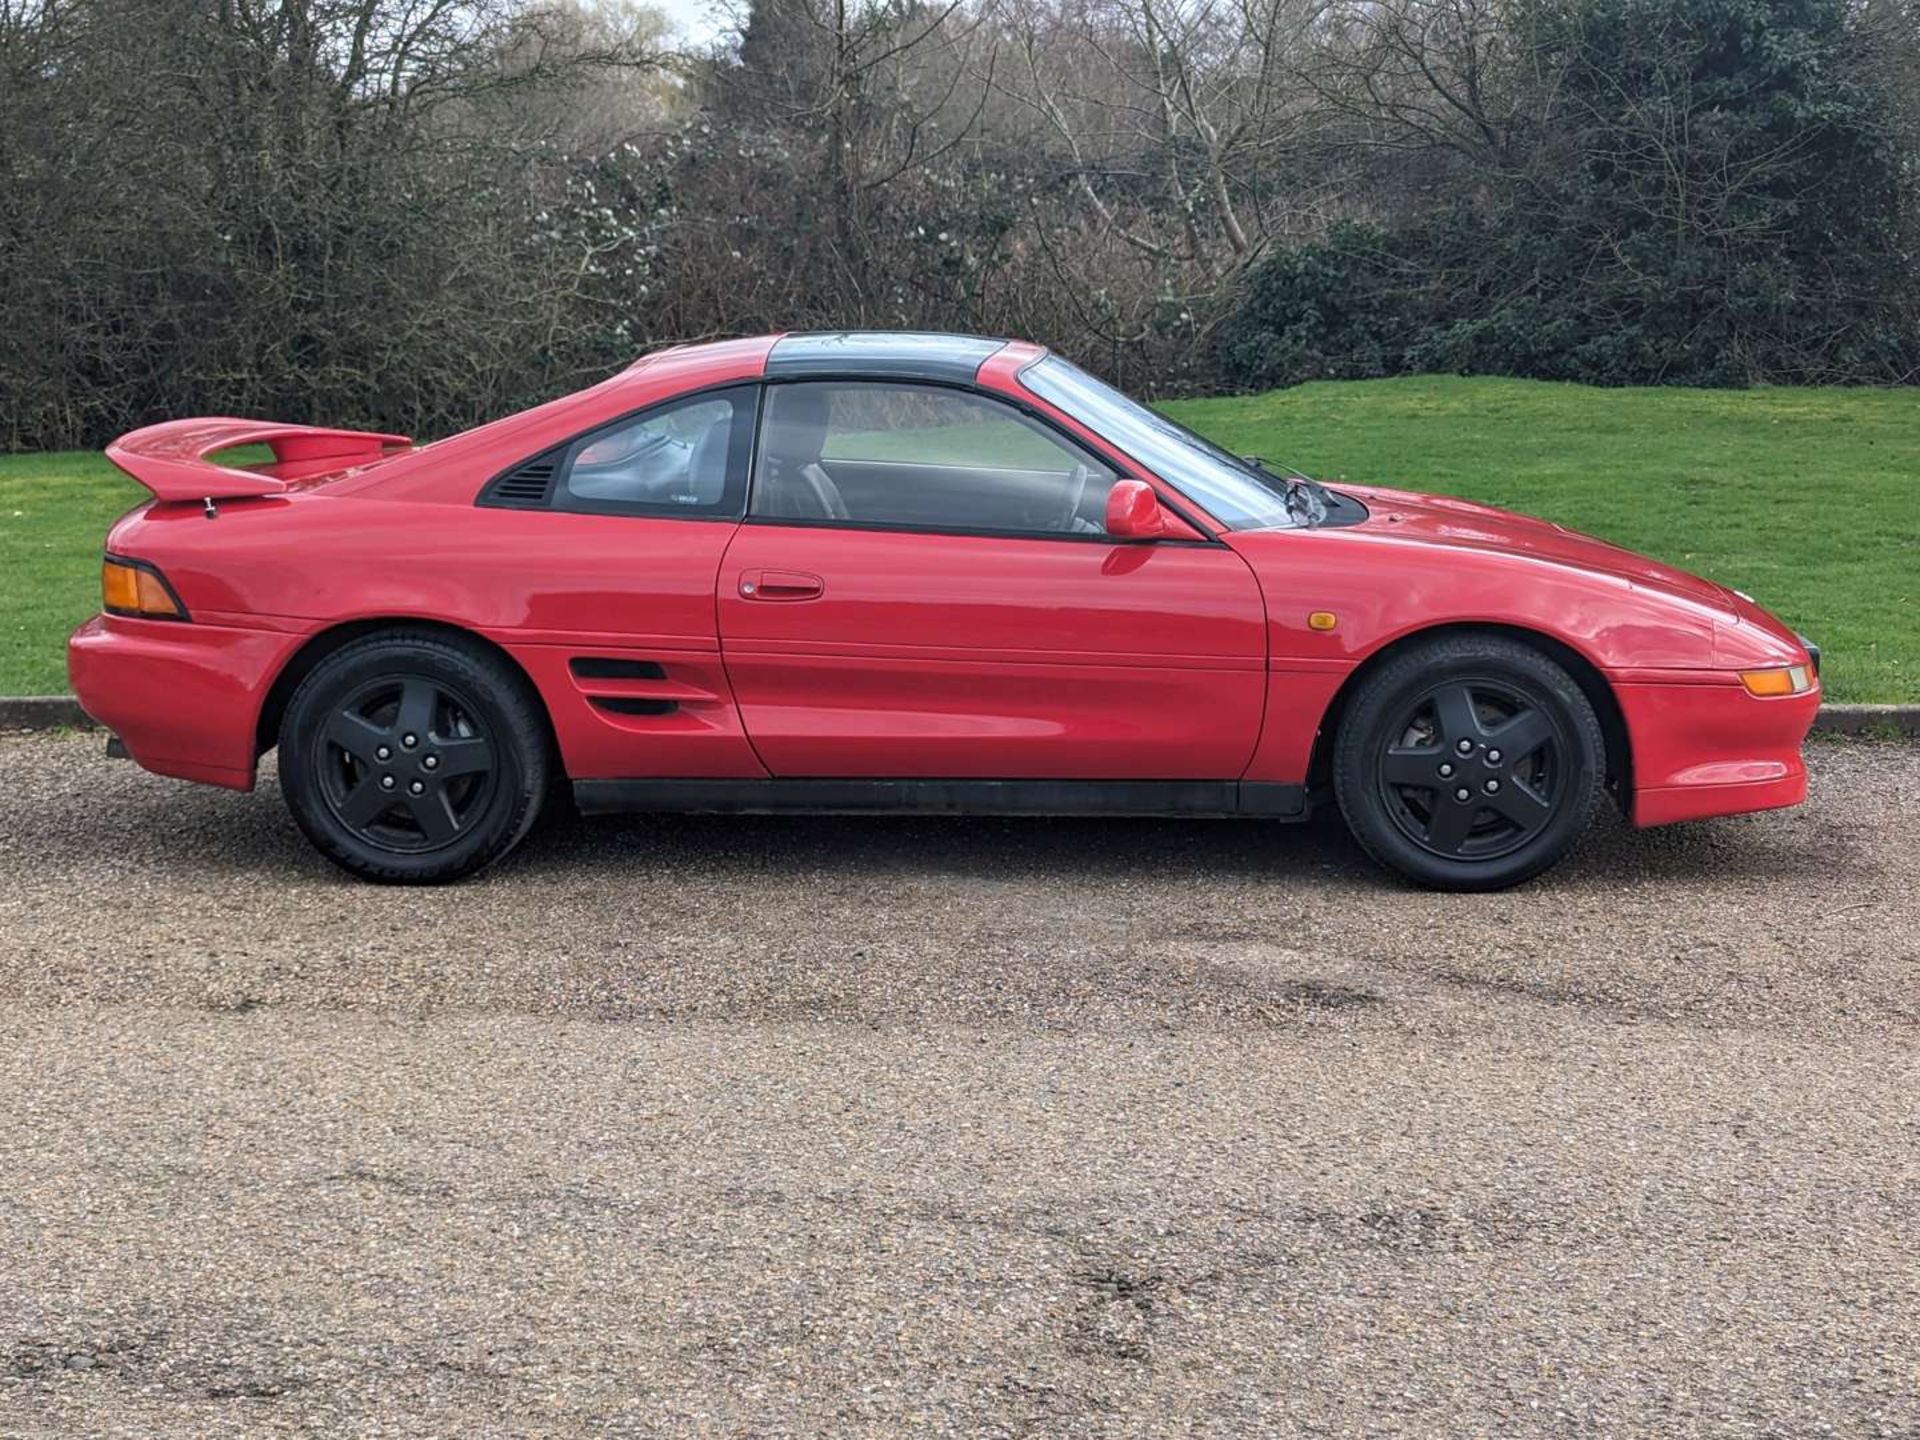 1995 TOYOTA MR2 GT - Image 8 of 27